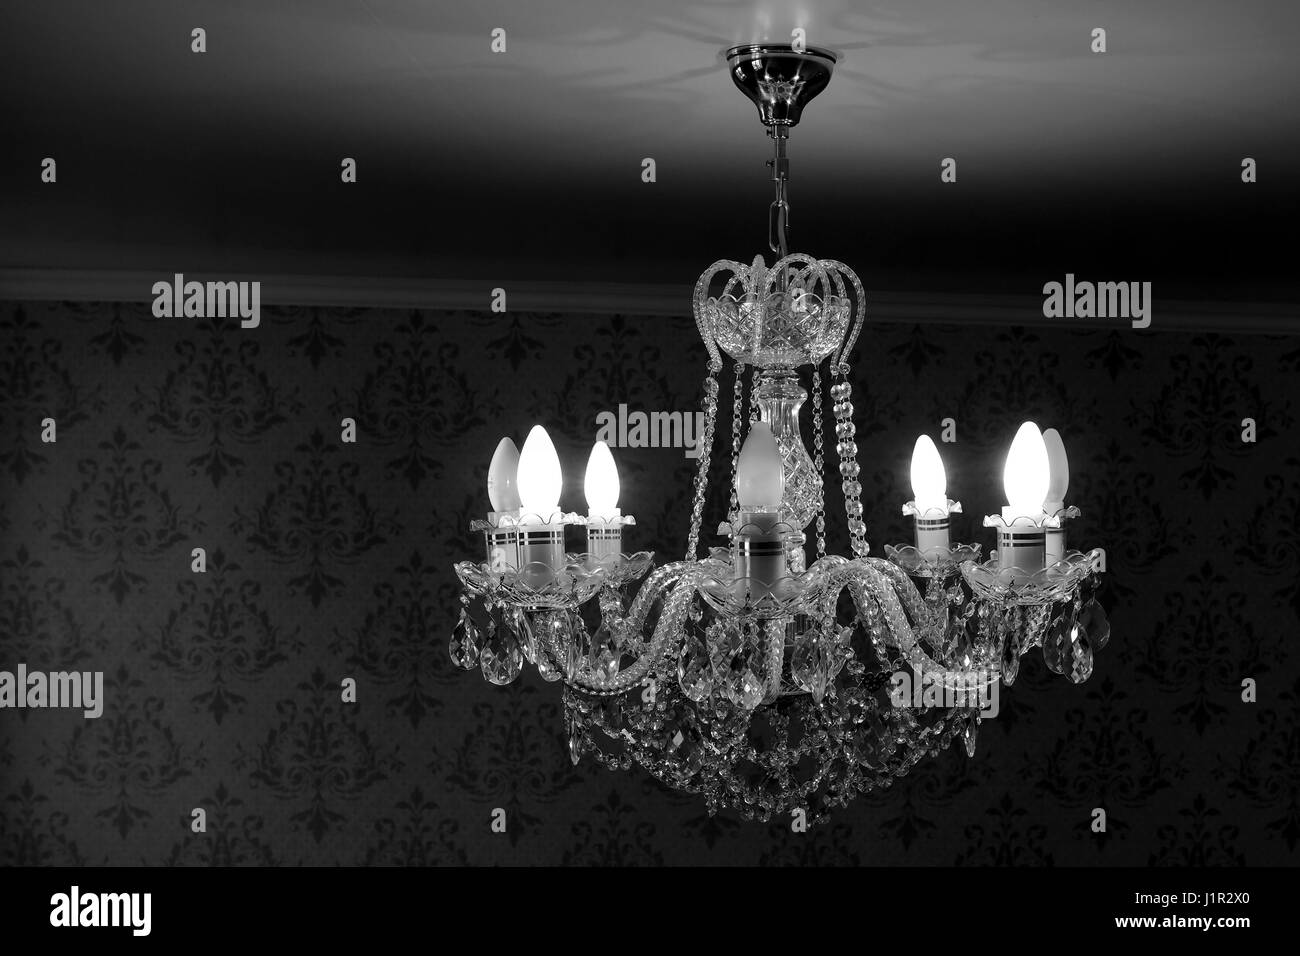 chandelier crystal light in the room from the ceiling Stock Photo